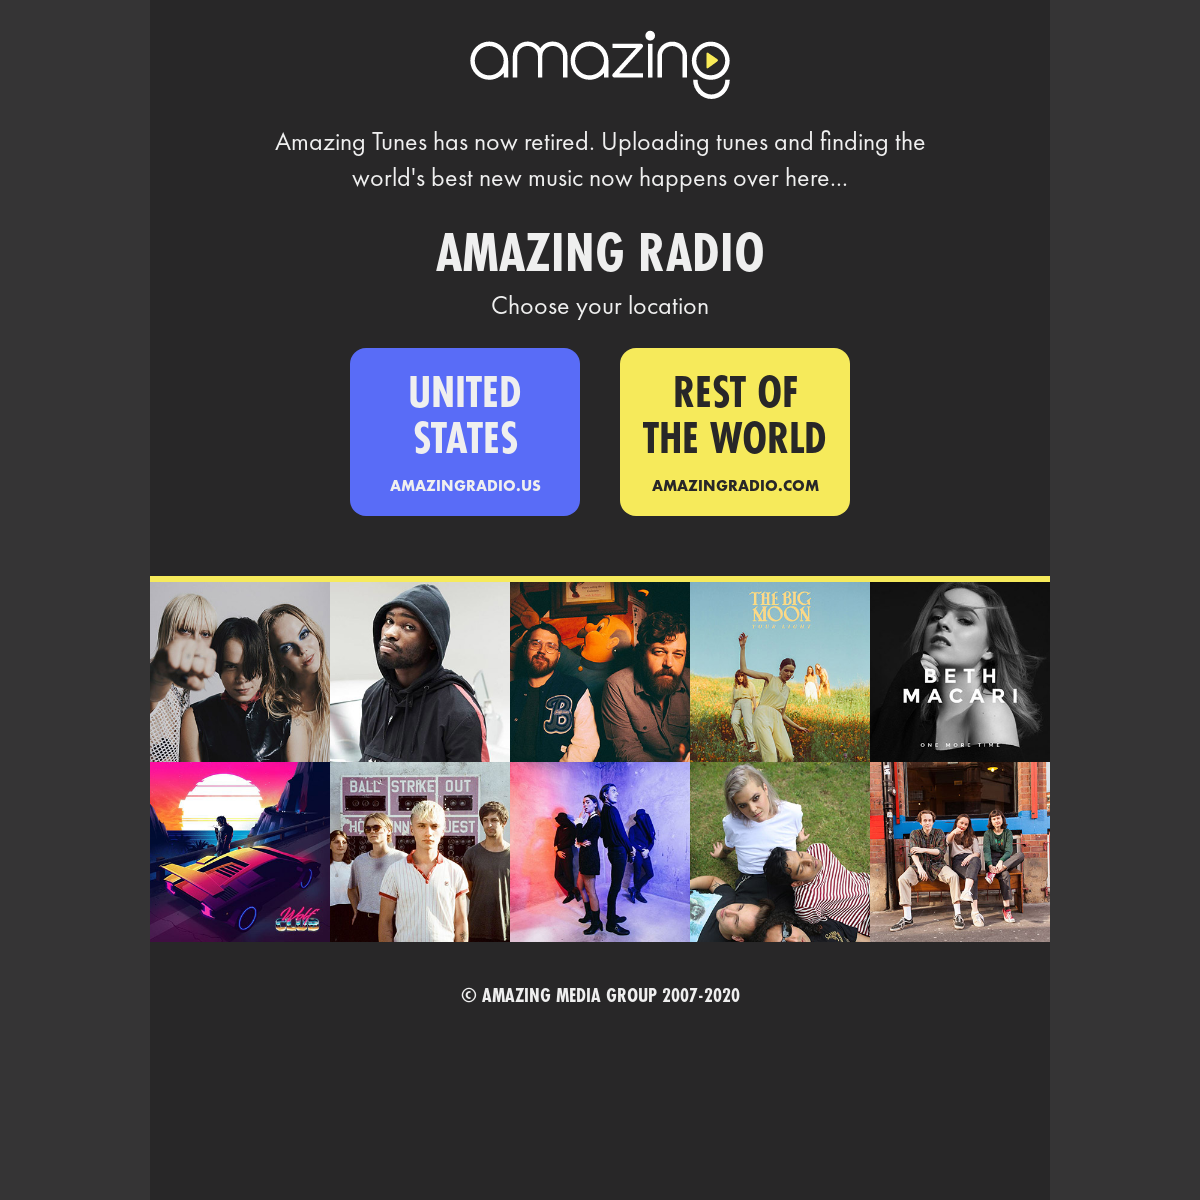 A complete backup of amazingtunes.com